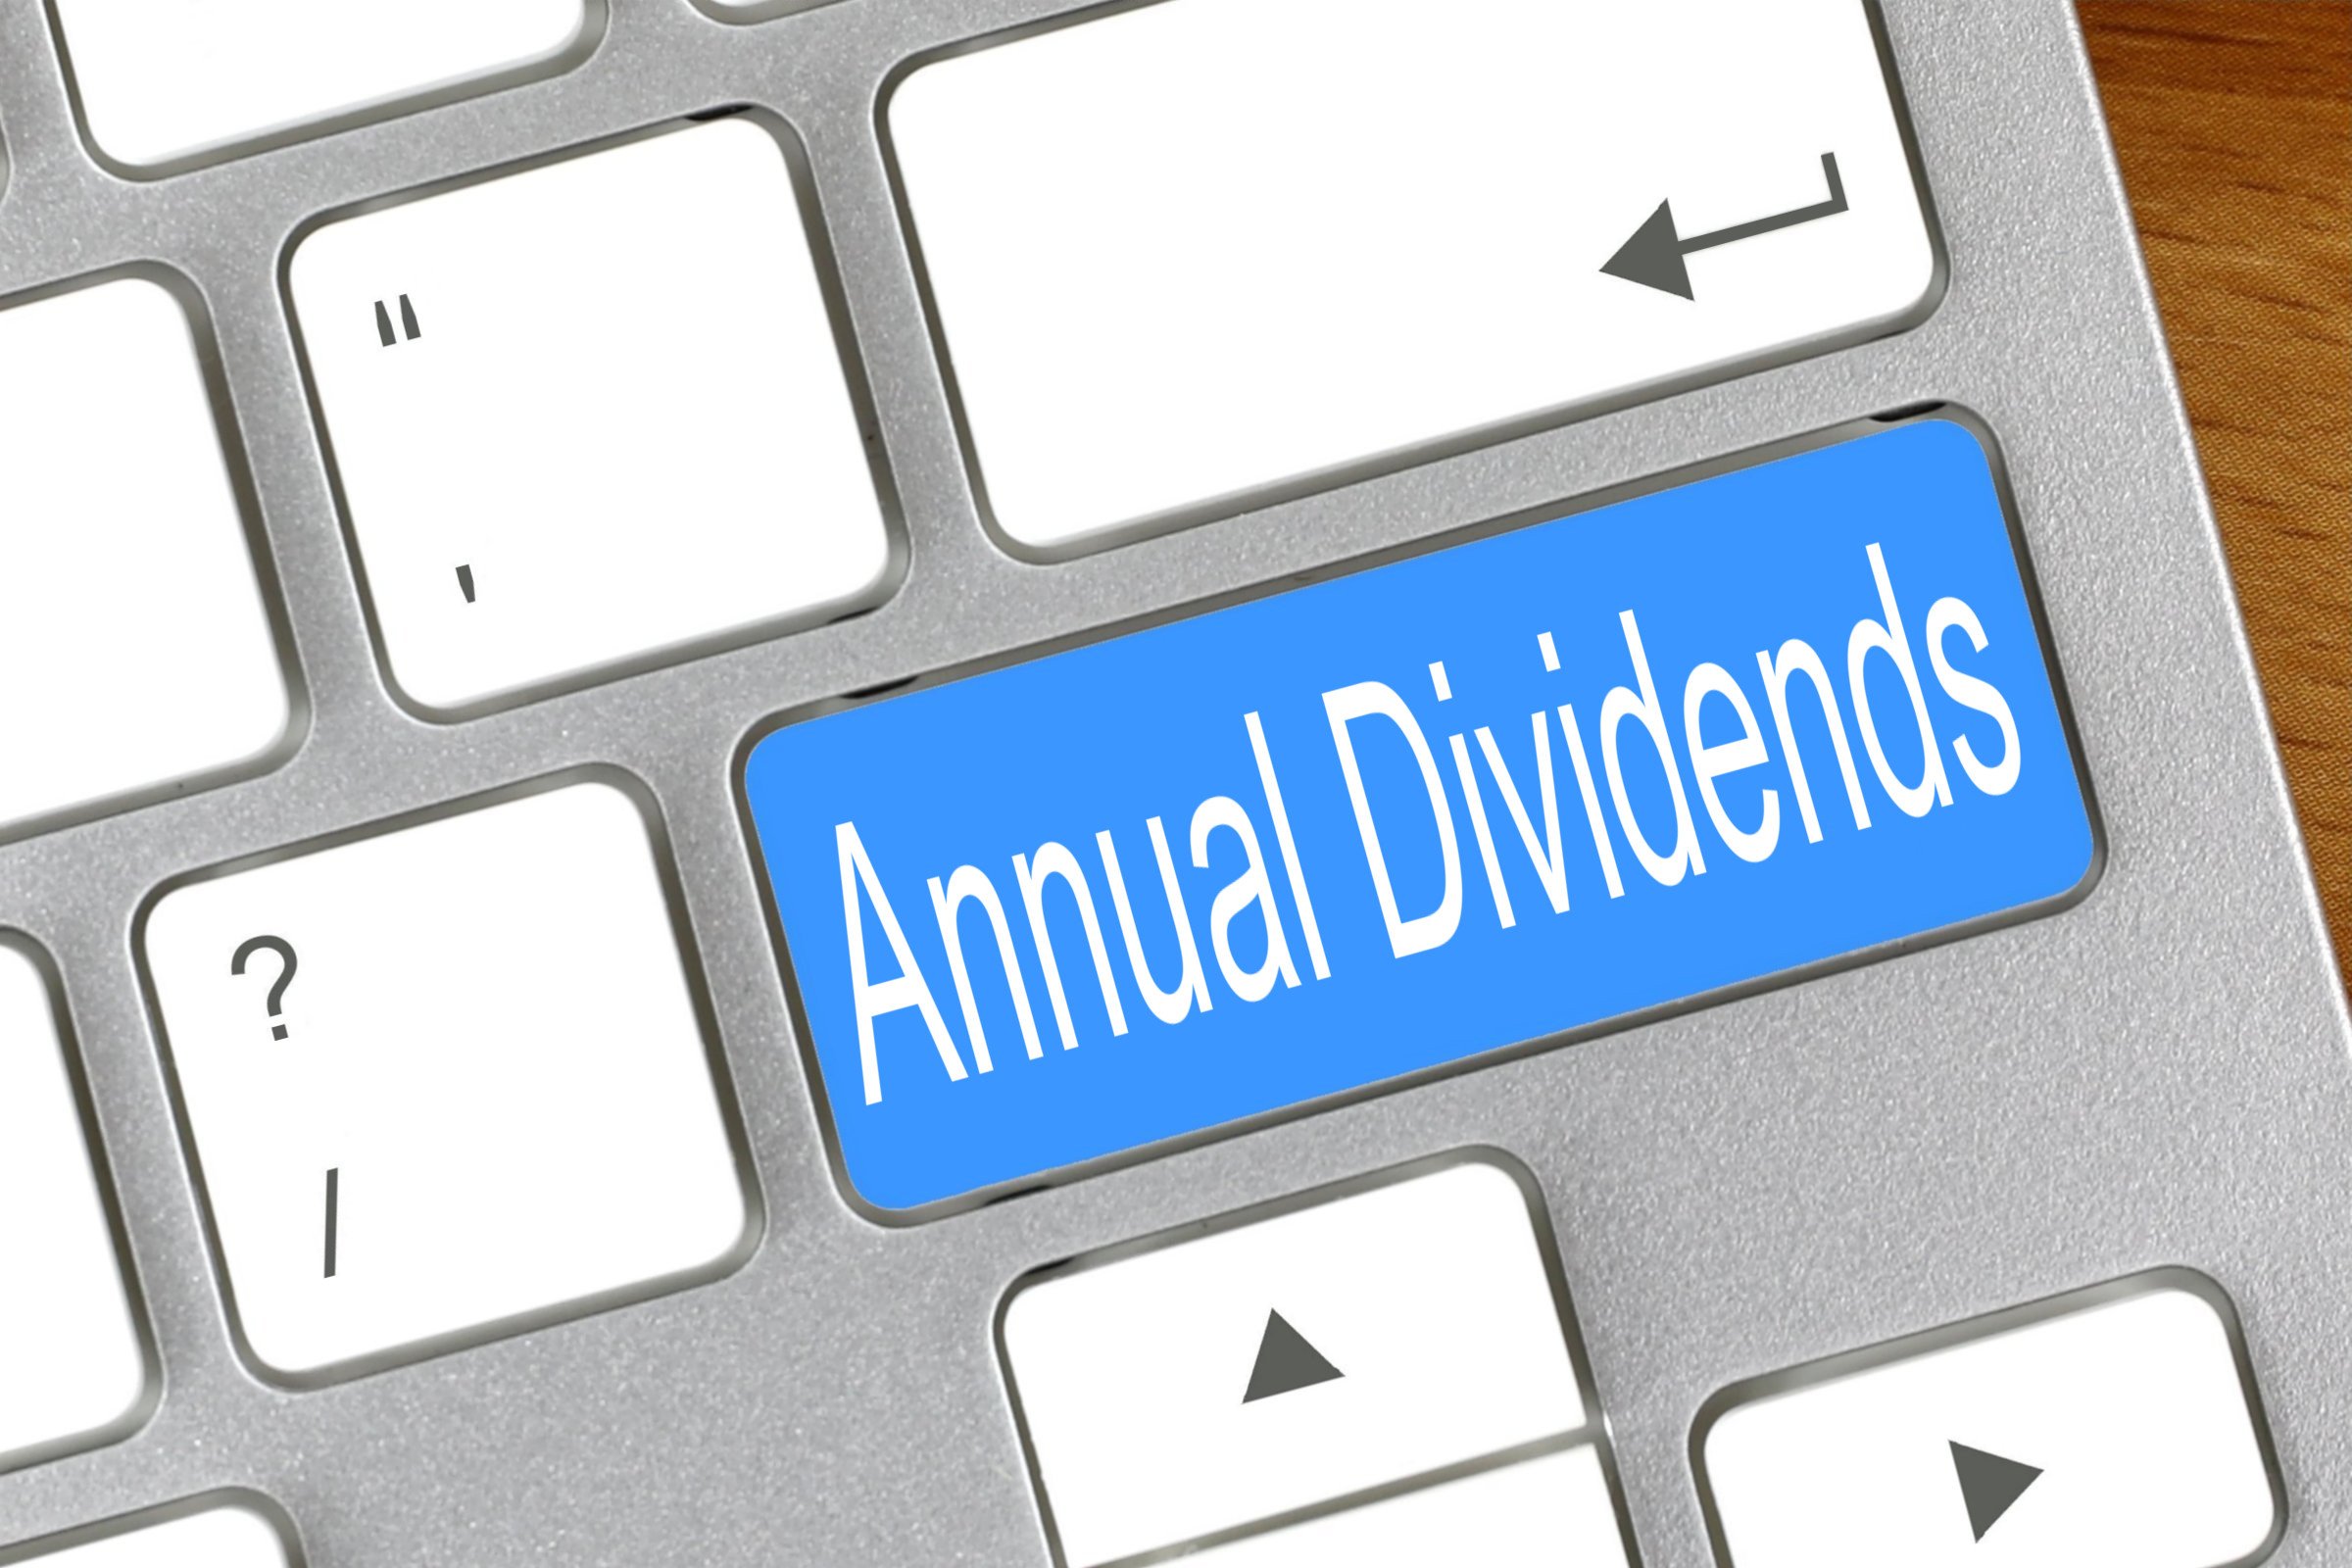 annual dividends